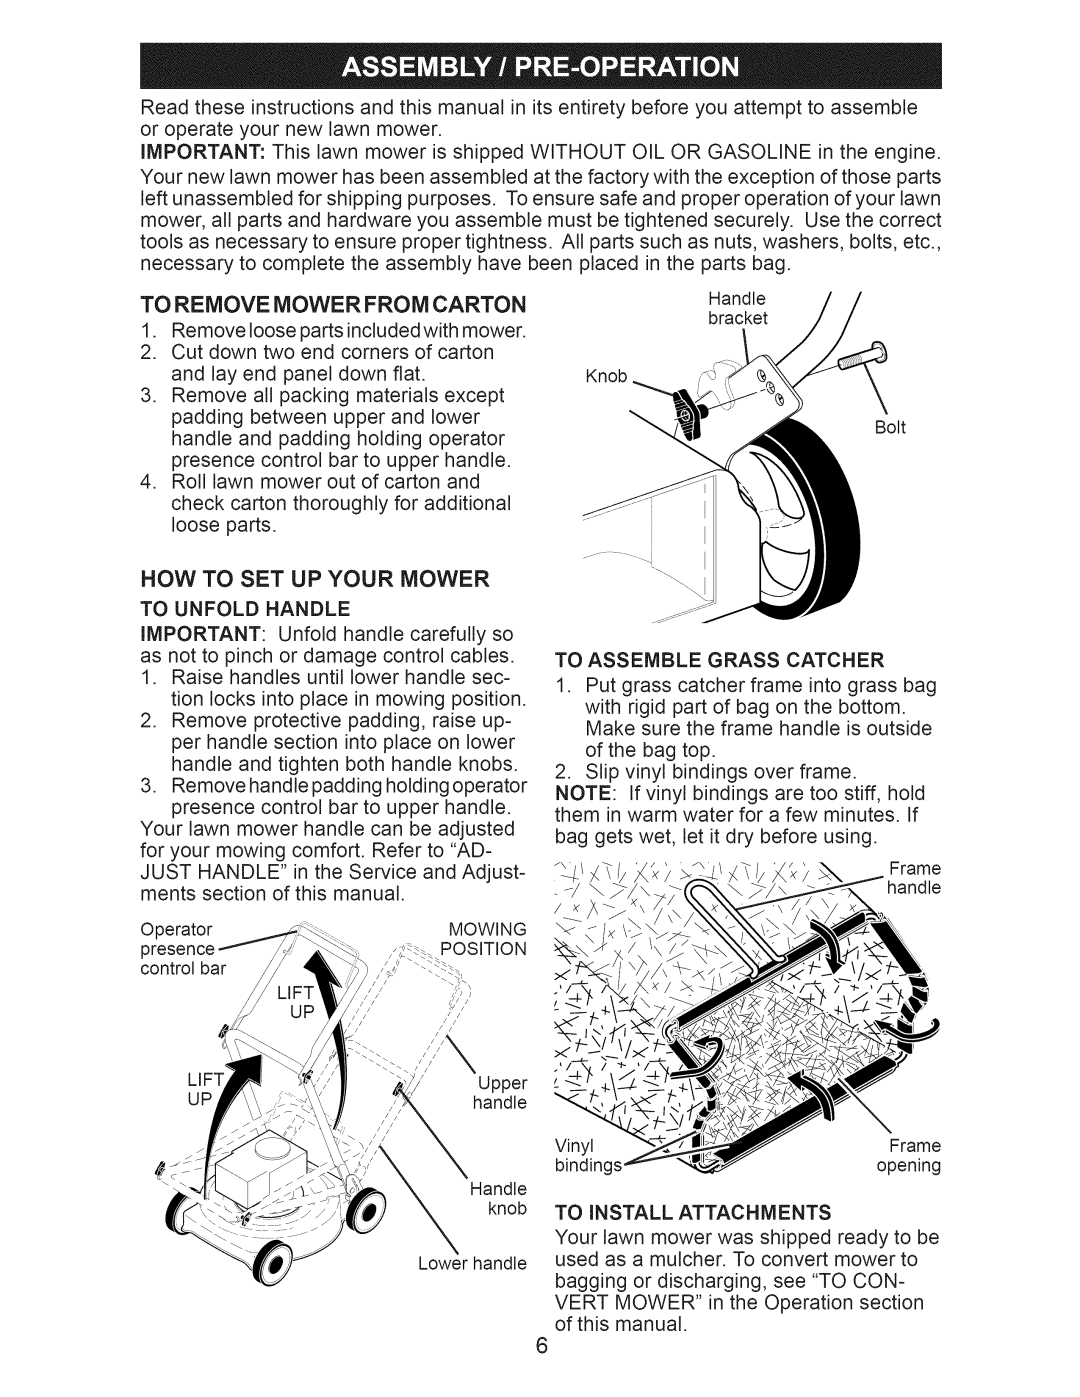 Craftsman 917.376540 manual To Remove Mower From Carton, Now To Set Up Your Mower 